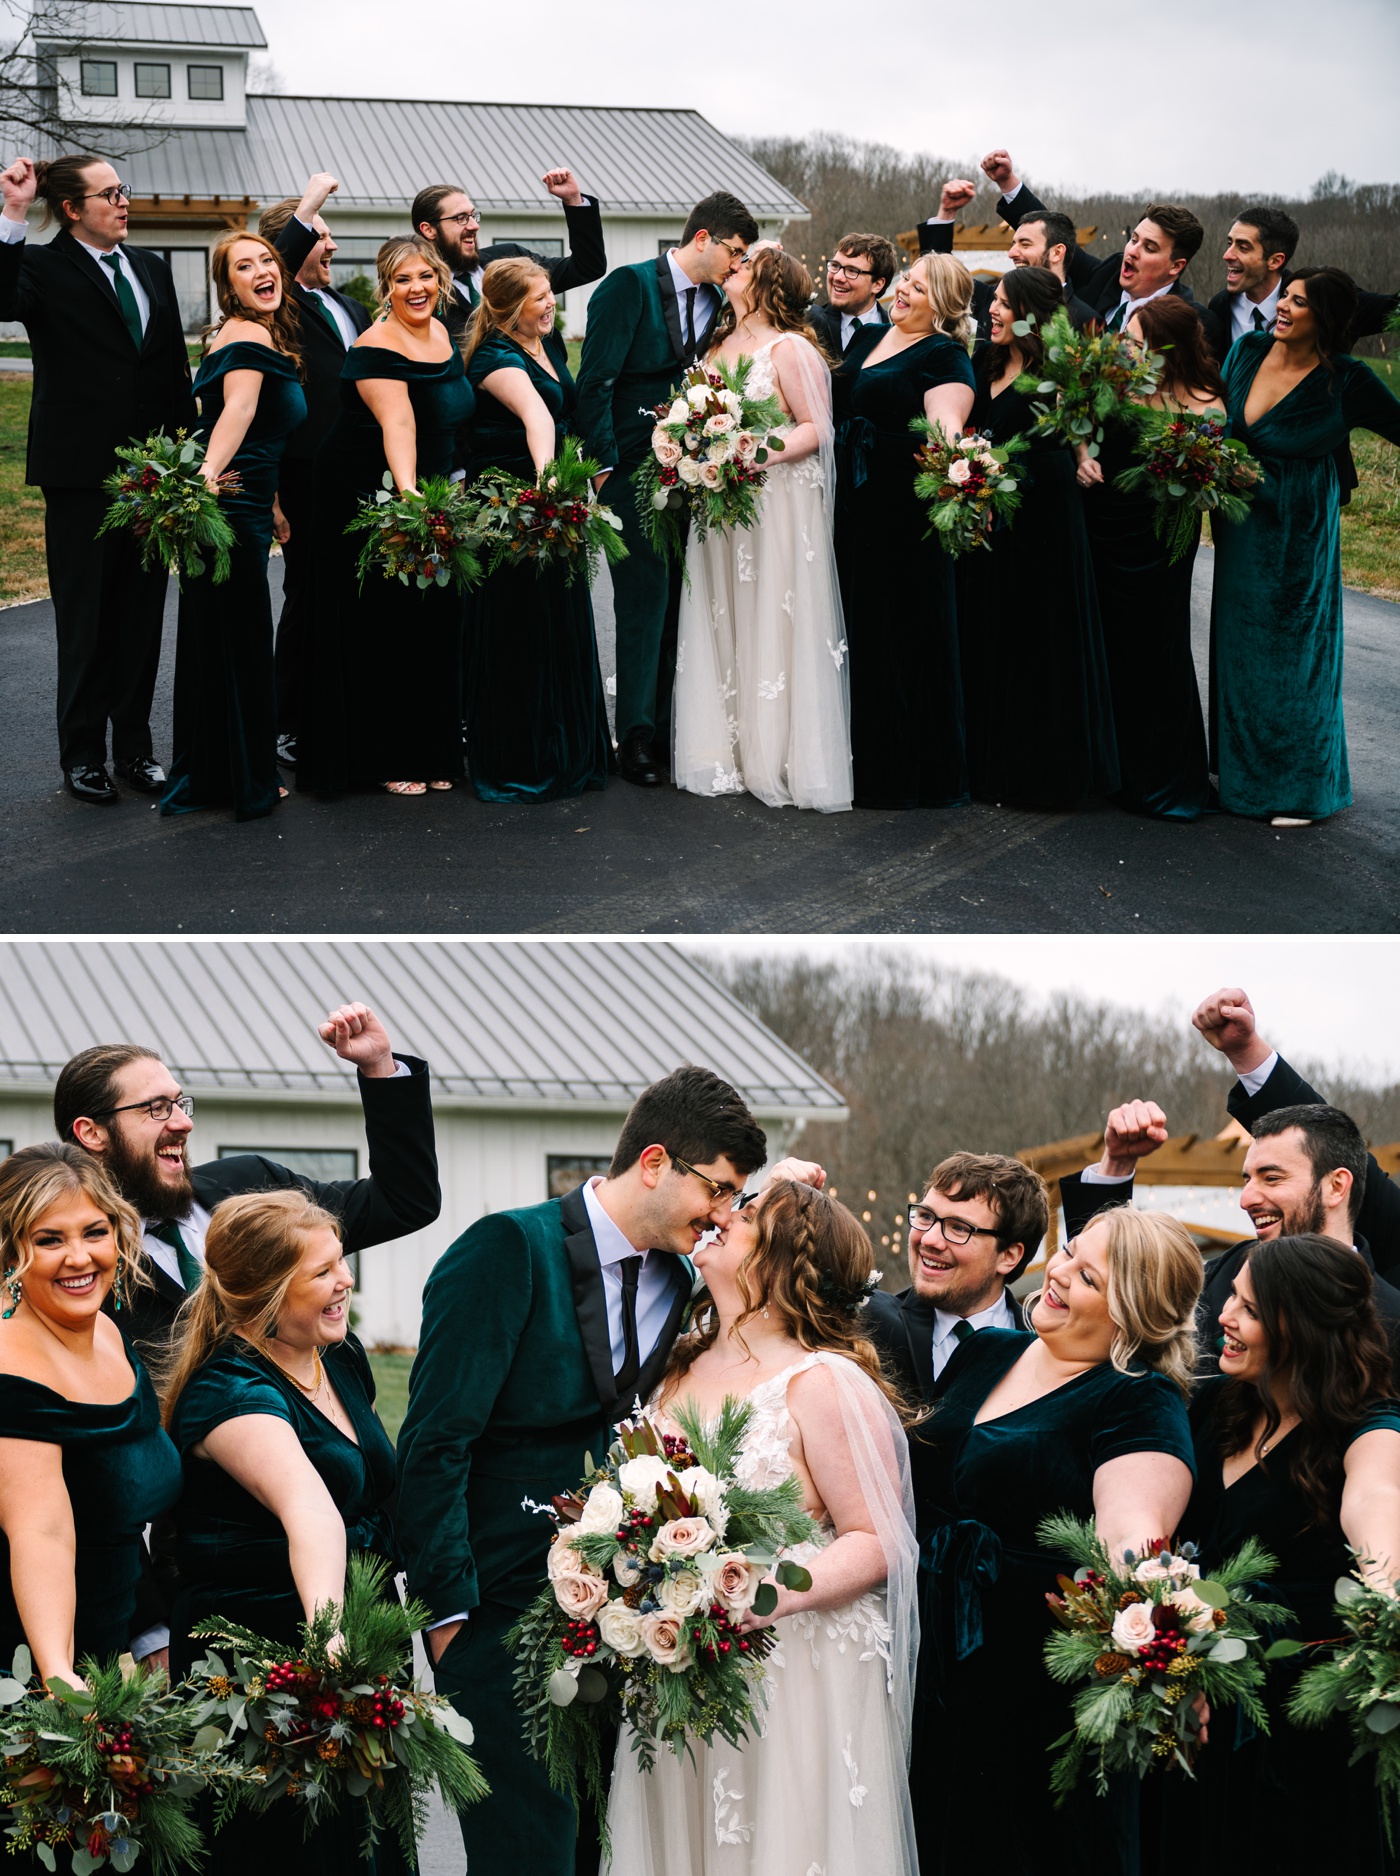 Bridal party portraits at The Wilds